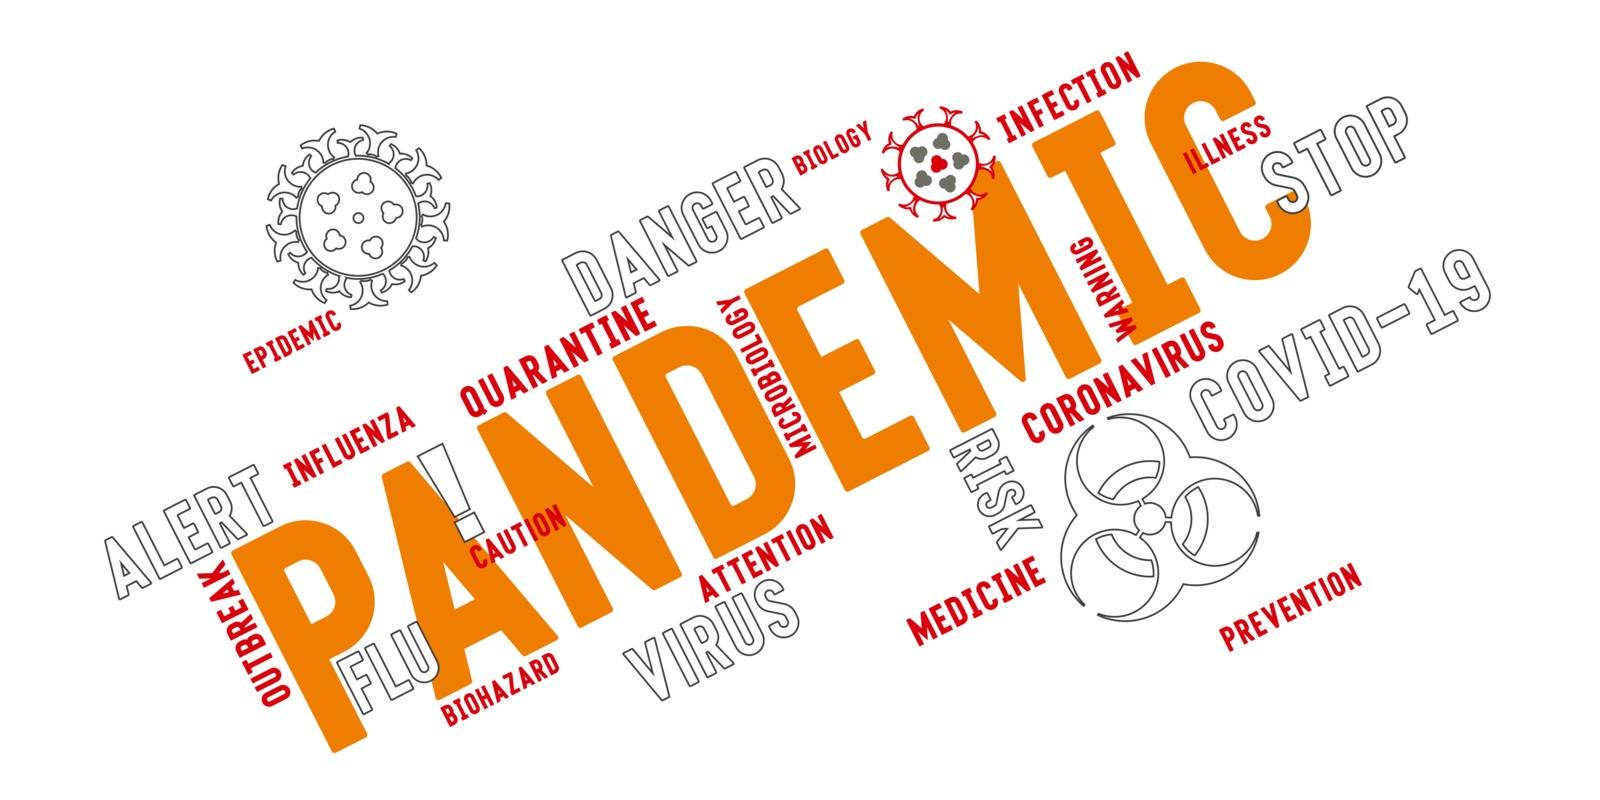 Pandemic word tag cloud typography with stylized virus icons by Artlex